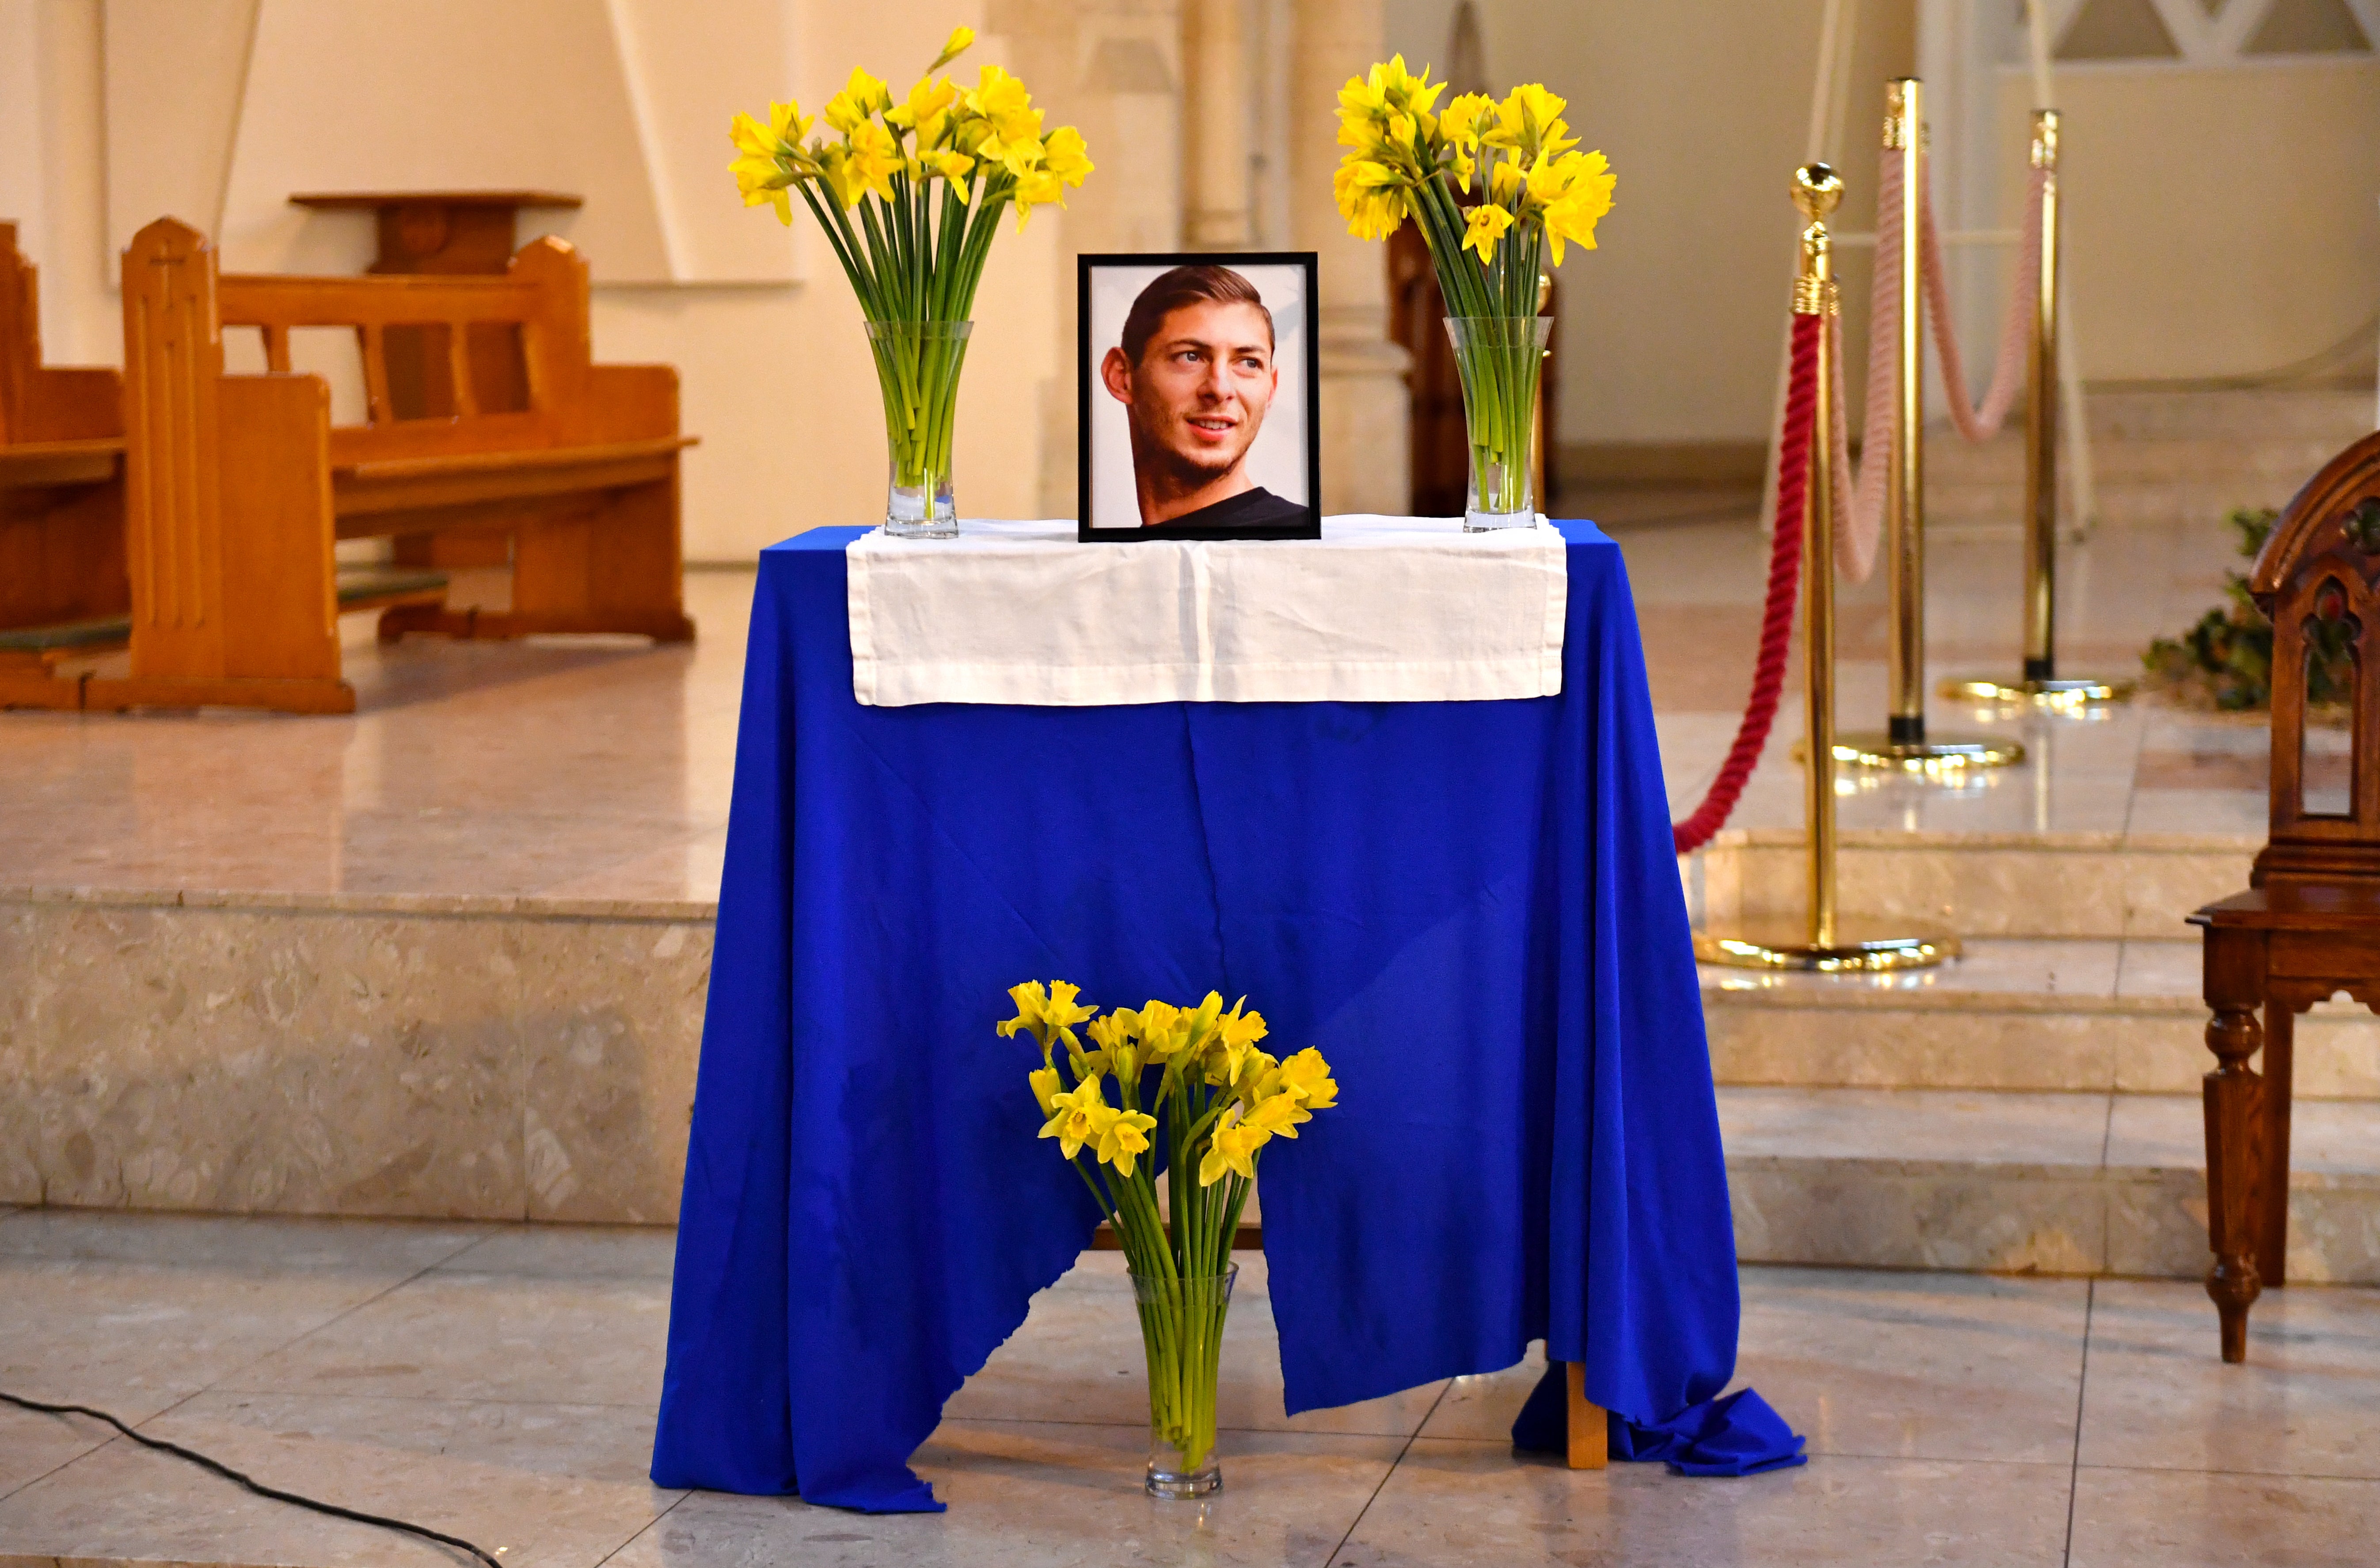 A portrait of Emiliano Sala is displayed at St David’s Cathedral, Cardiff (Jacob King/PA)